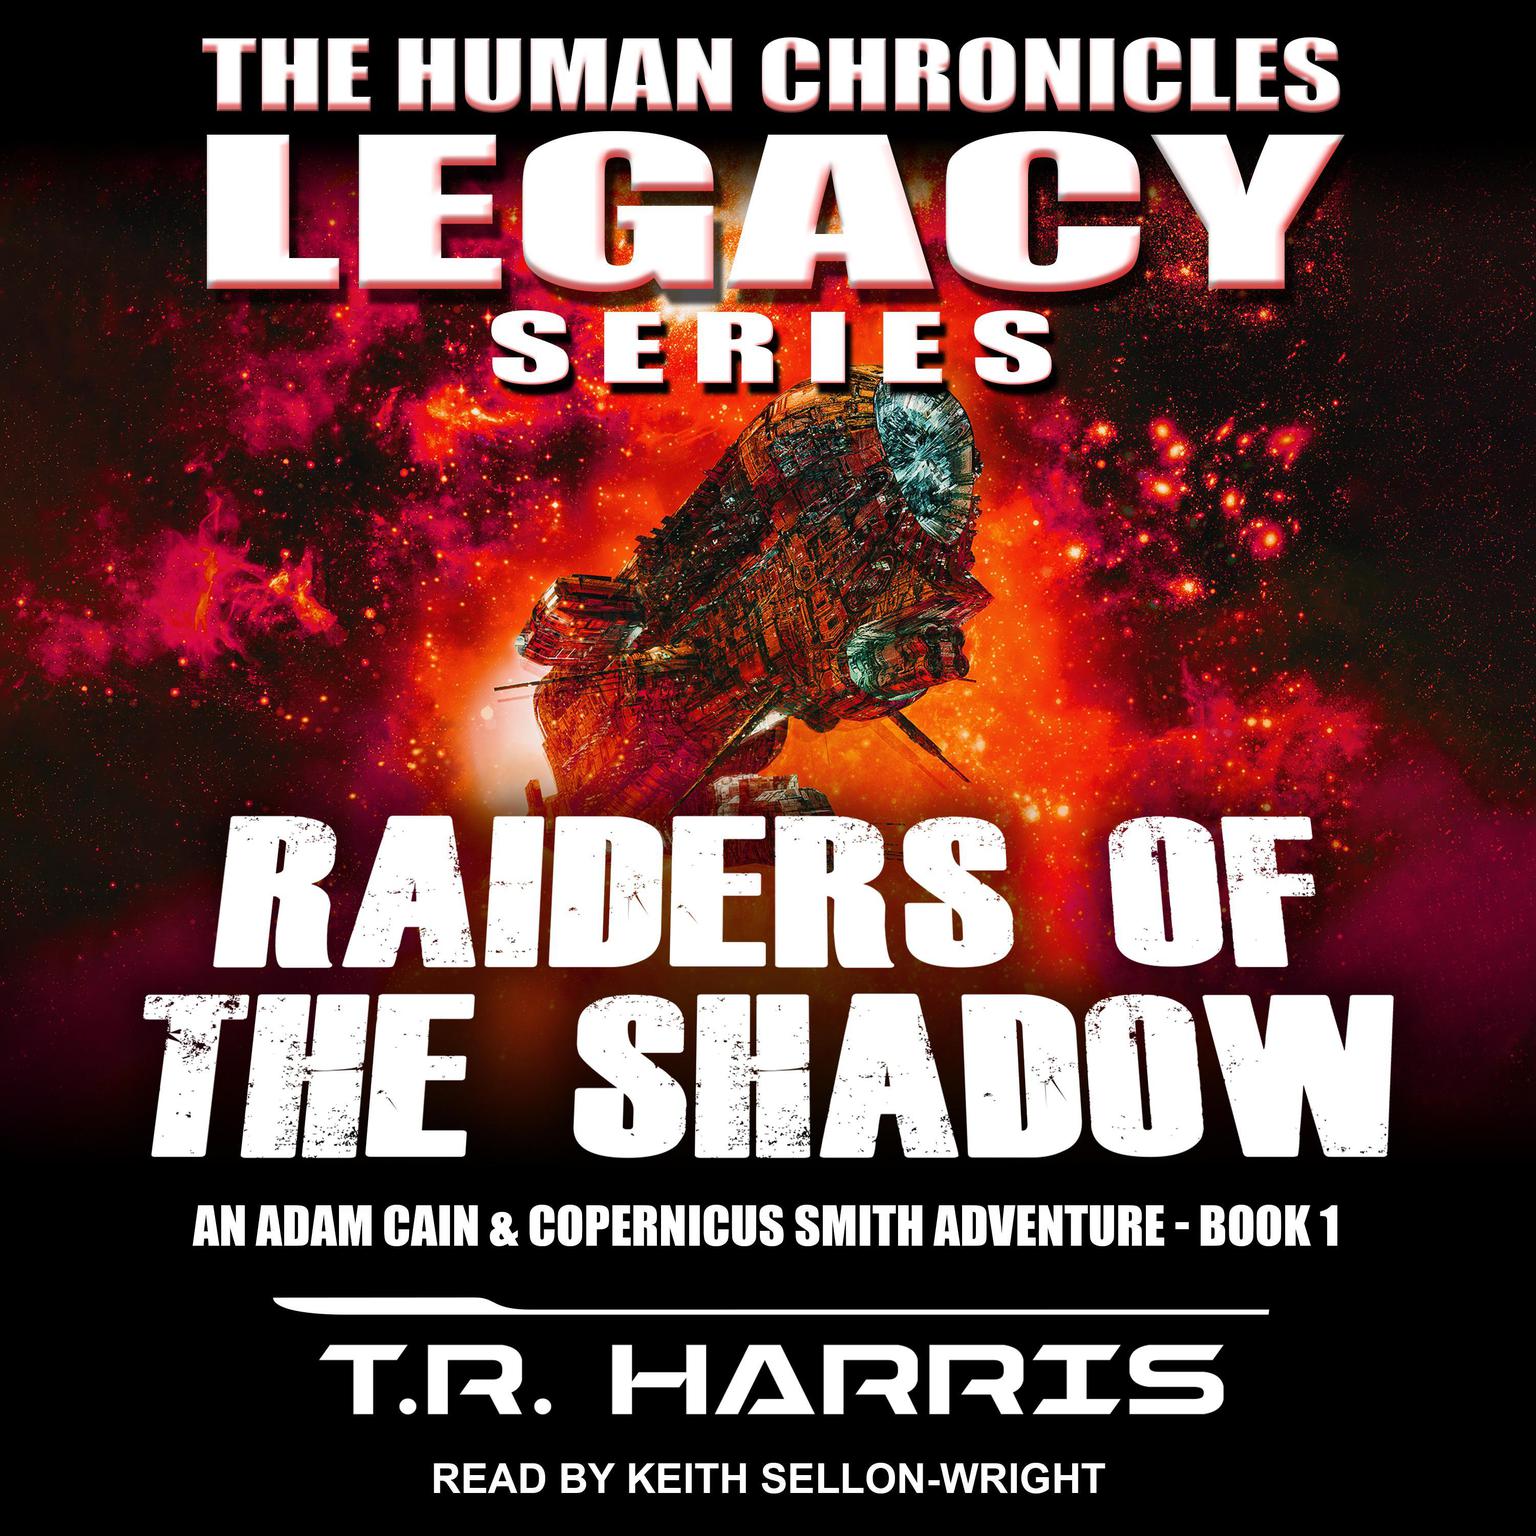 Raiders of the Shadow: An Adam Cain and Copernicus Smith Adventure: The Human Chronicles Legacy Series Book 1 Audiobook, by T. R. Harris